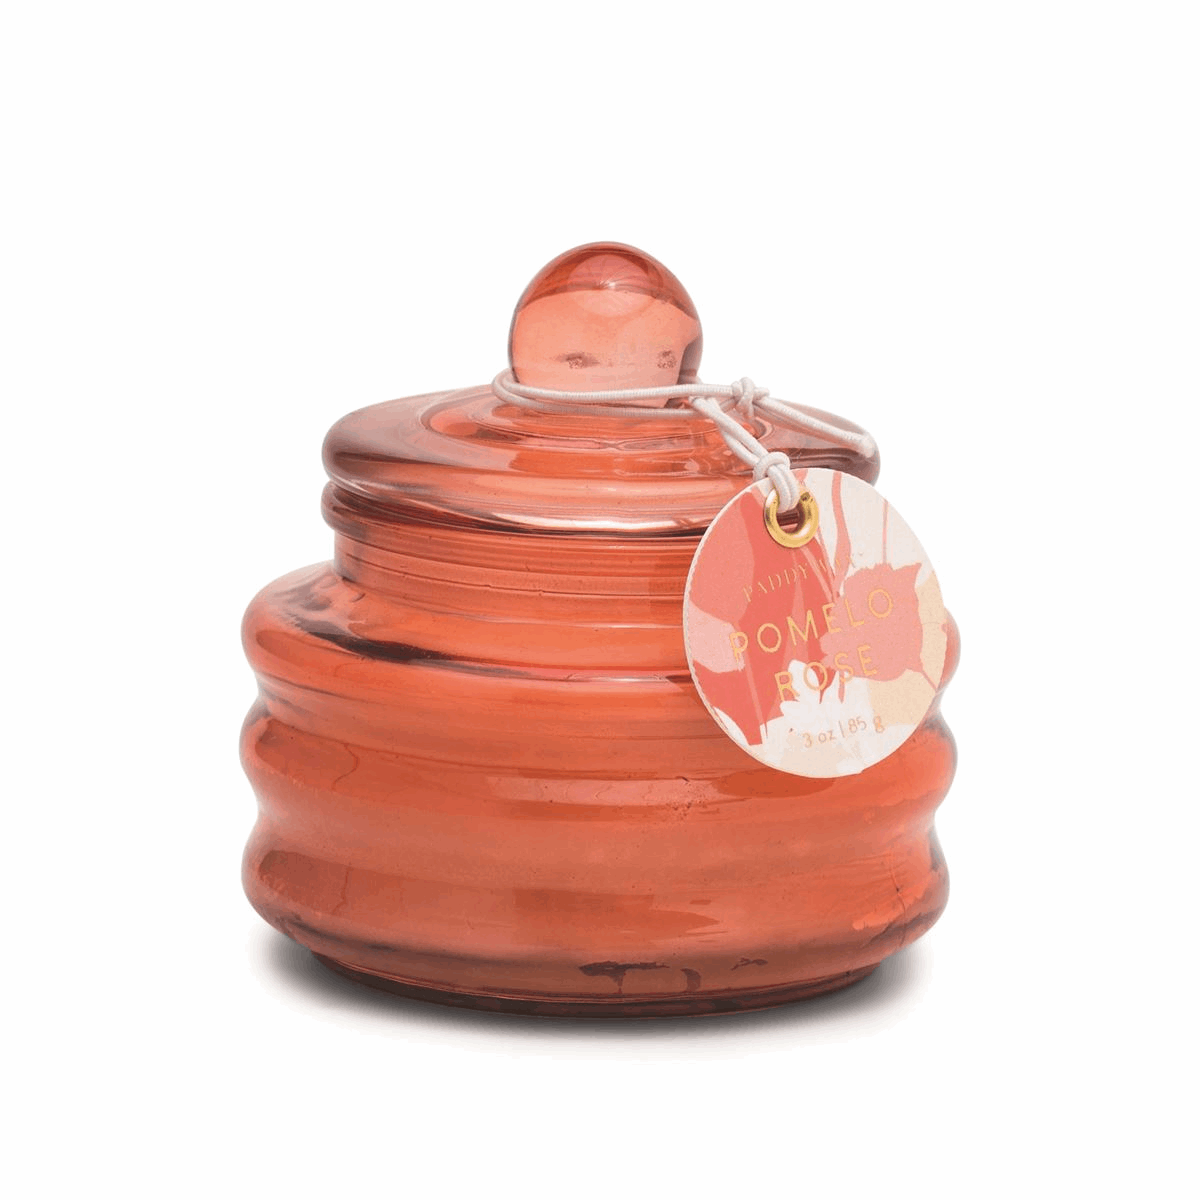 BEAM DUSTY RED GLASS WITH LID - POMELO ROSE